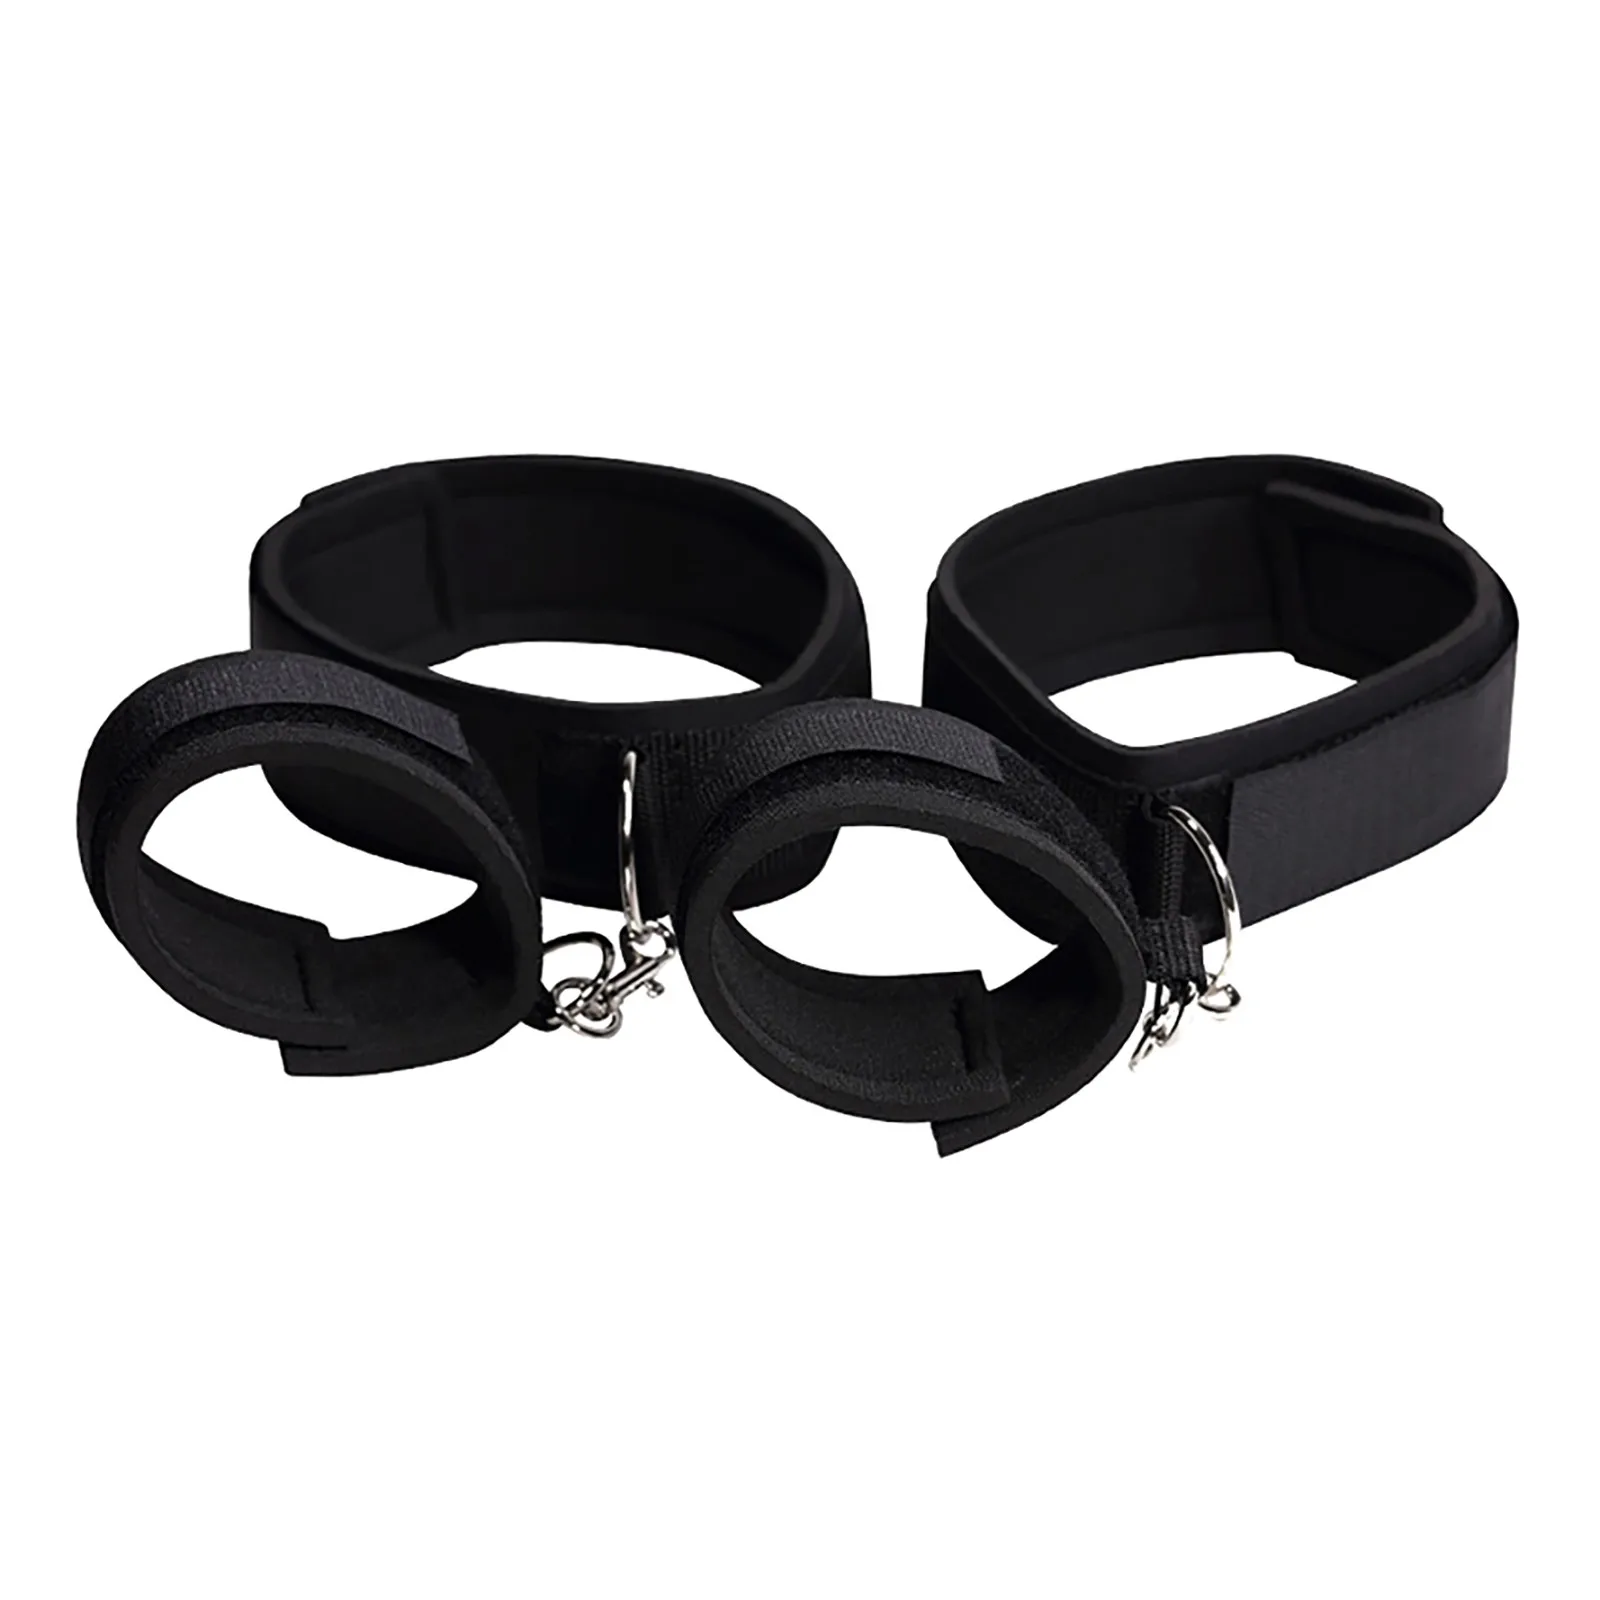 

Sex Toys for Woman Slave Leg Spreader Bar Bondage Handcuffs Ankle Cuffs Restraints Roleplay SM Binding Strap Adult Games